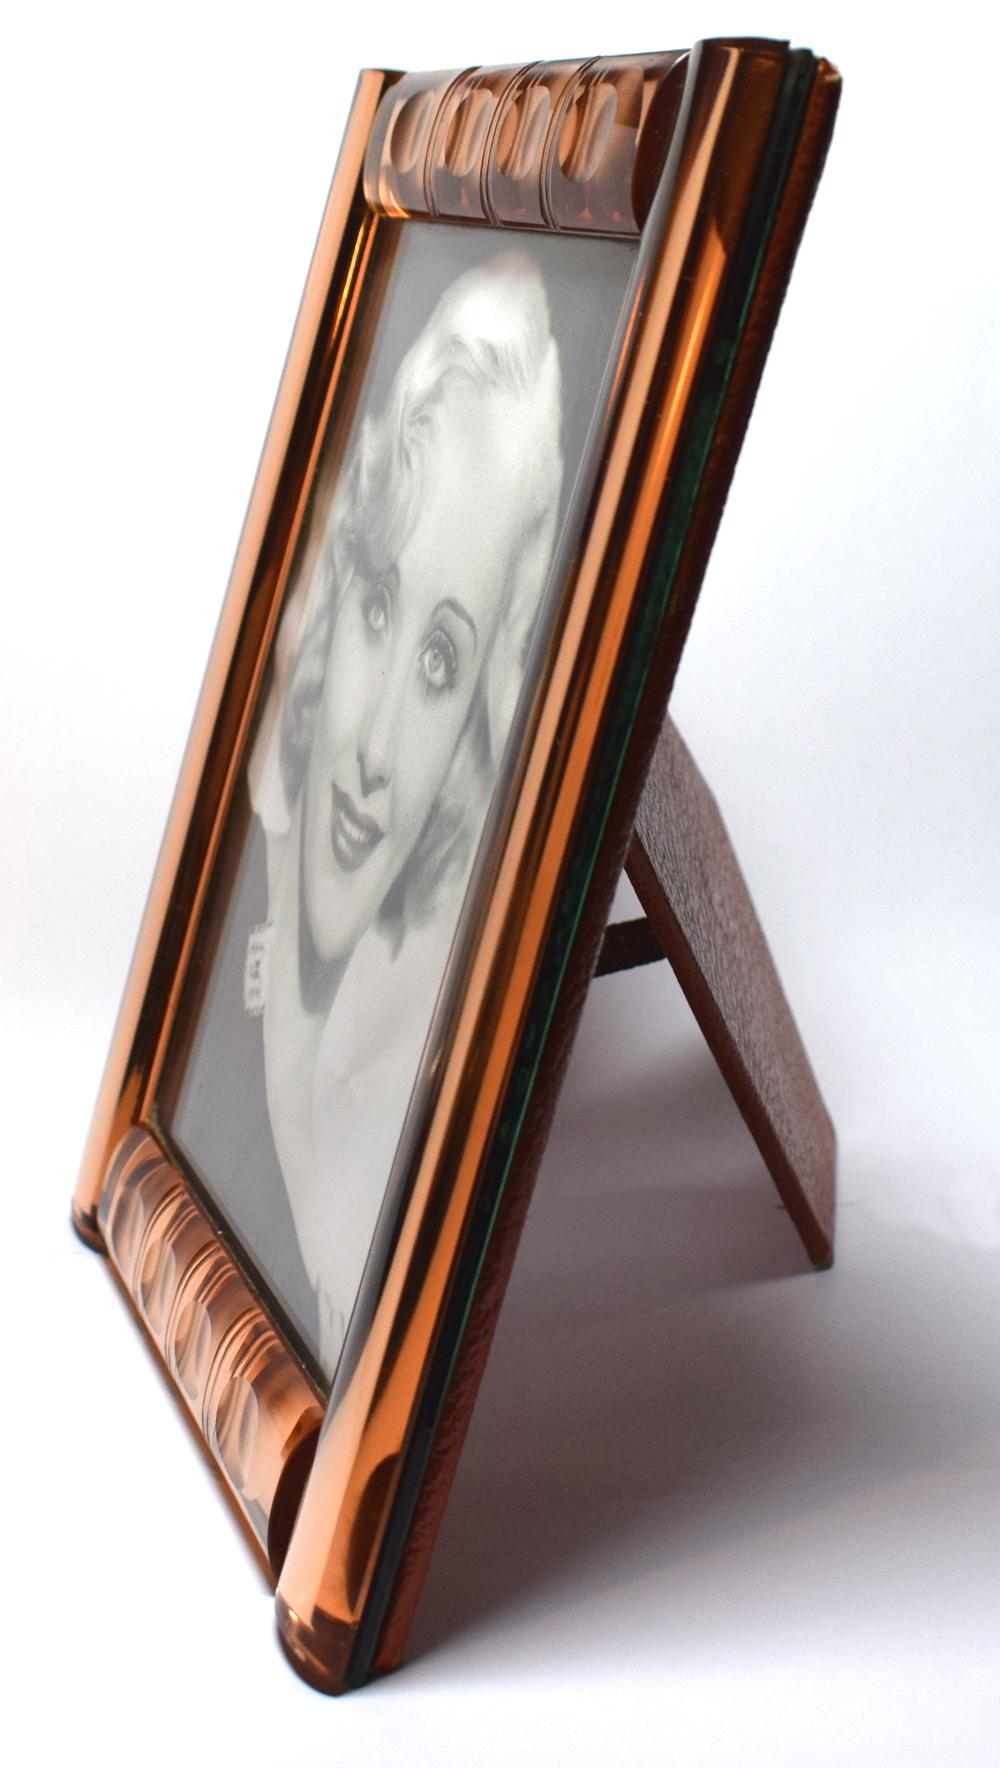 mirrored picture frame